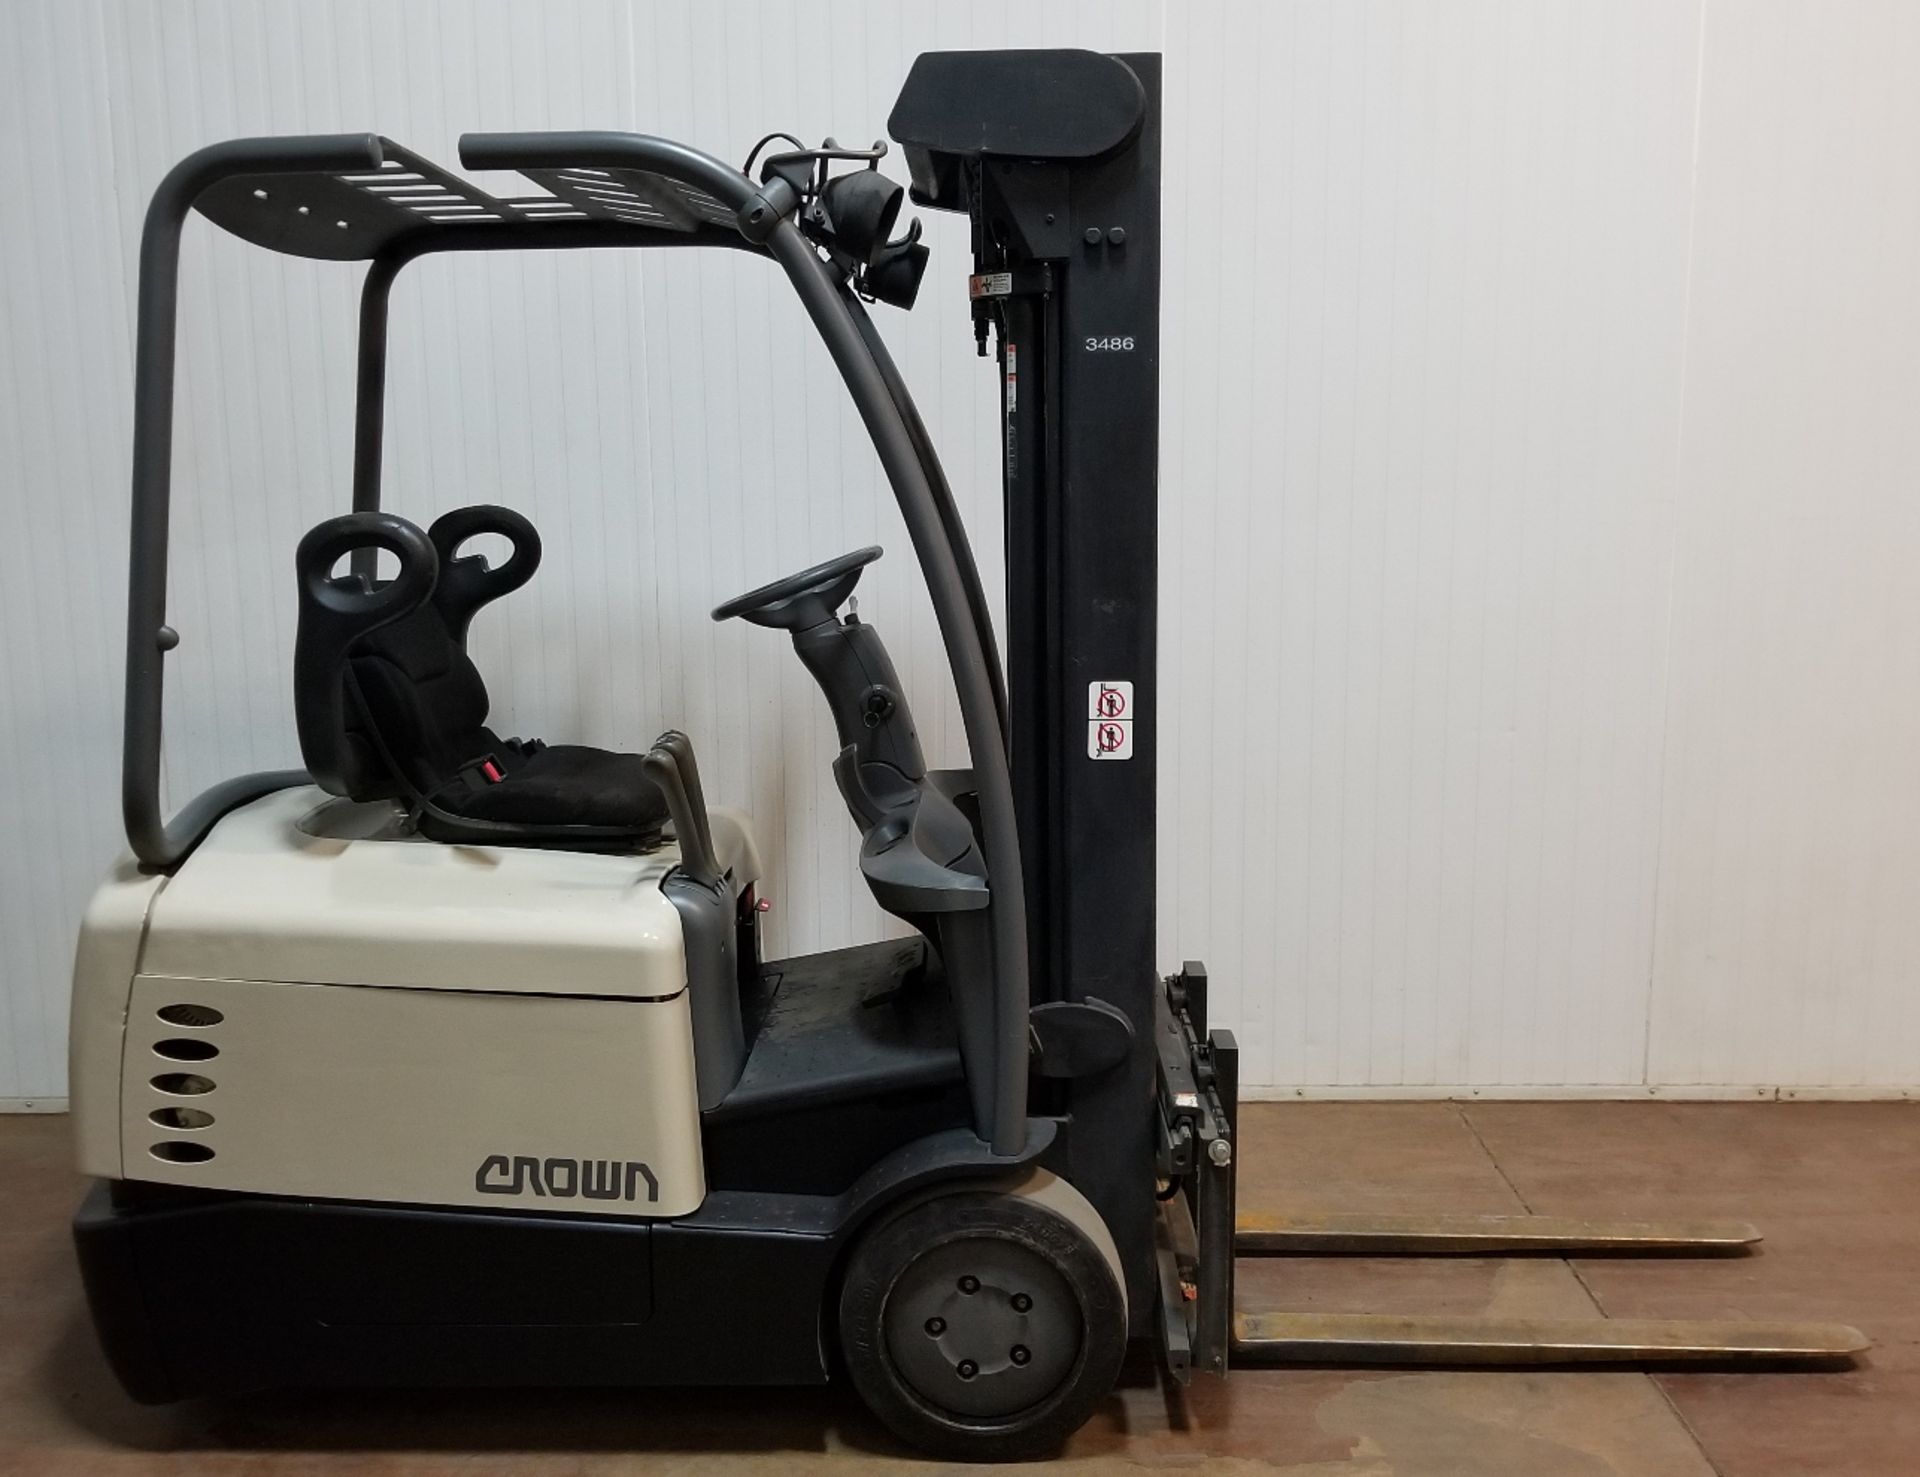 CROWN (2001) SC4020-30 2,750 LB. CAPACITY 36V ELECTRIC 3-WHEEL FORKLIFT WITH 190" MAX. LIFT